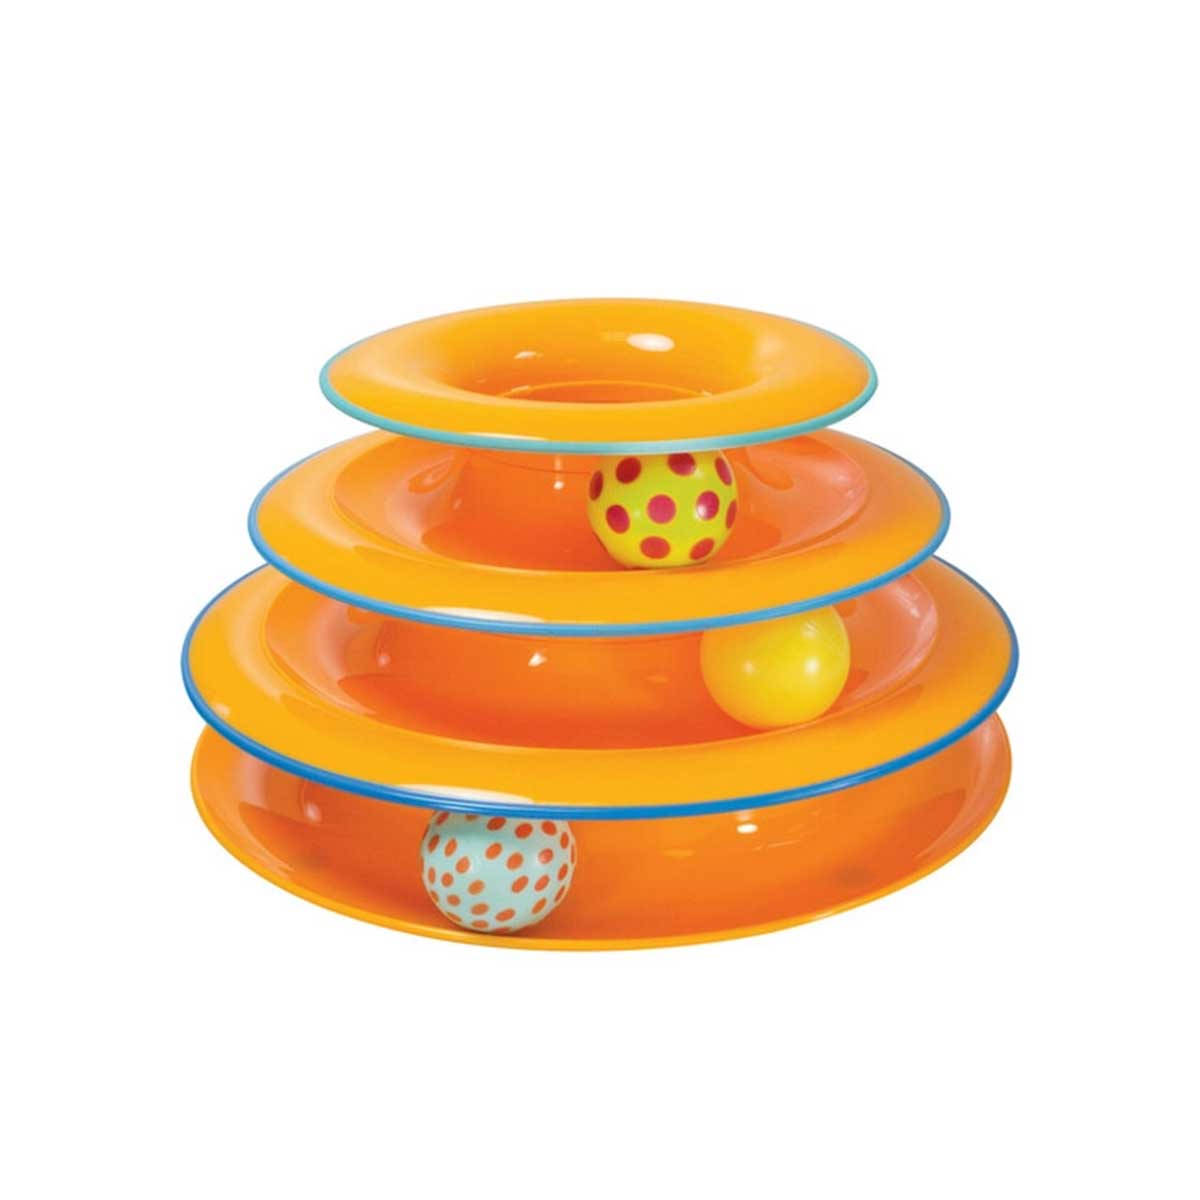 Tower of Tracks Cat Multi Level Toy | Pawlicious & Company